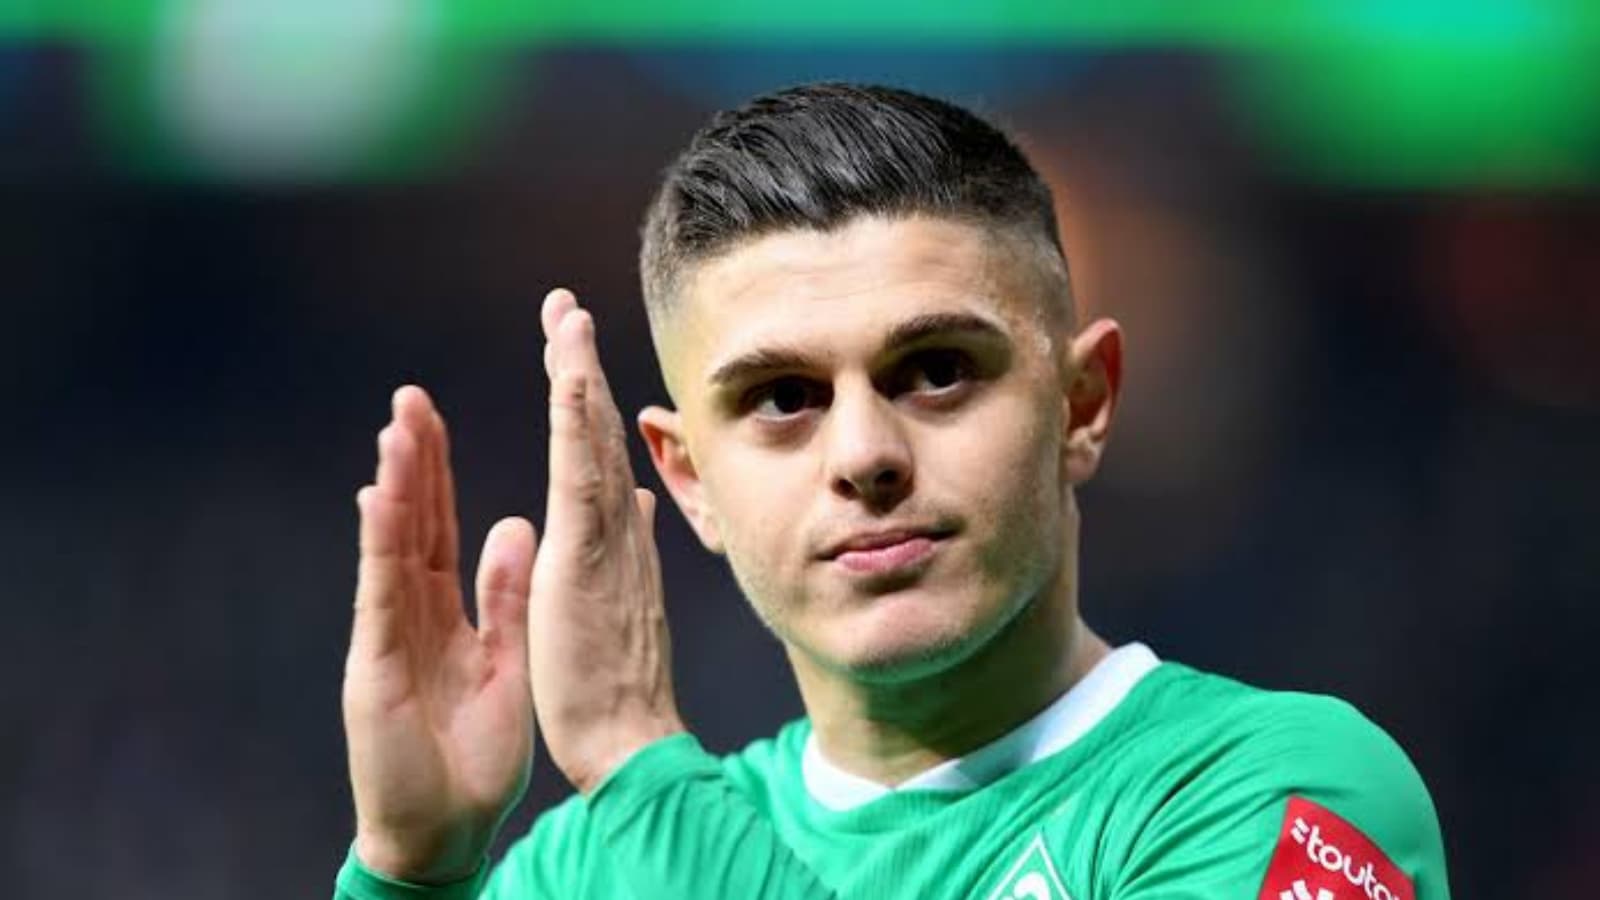 Milot Rashica Net worth, Football career, Endorsements, Parents, Wife and more – FirstSportz